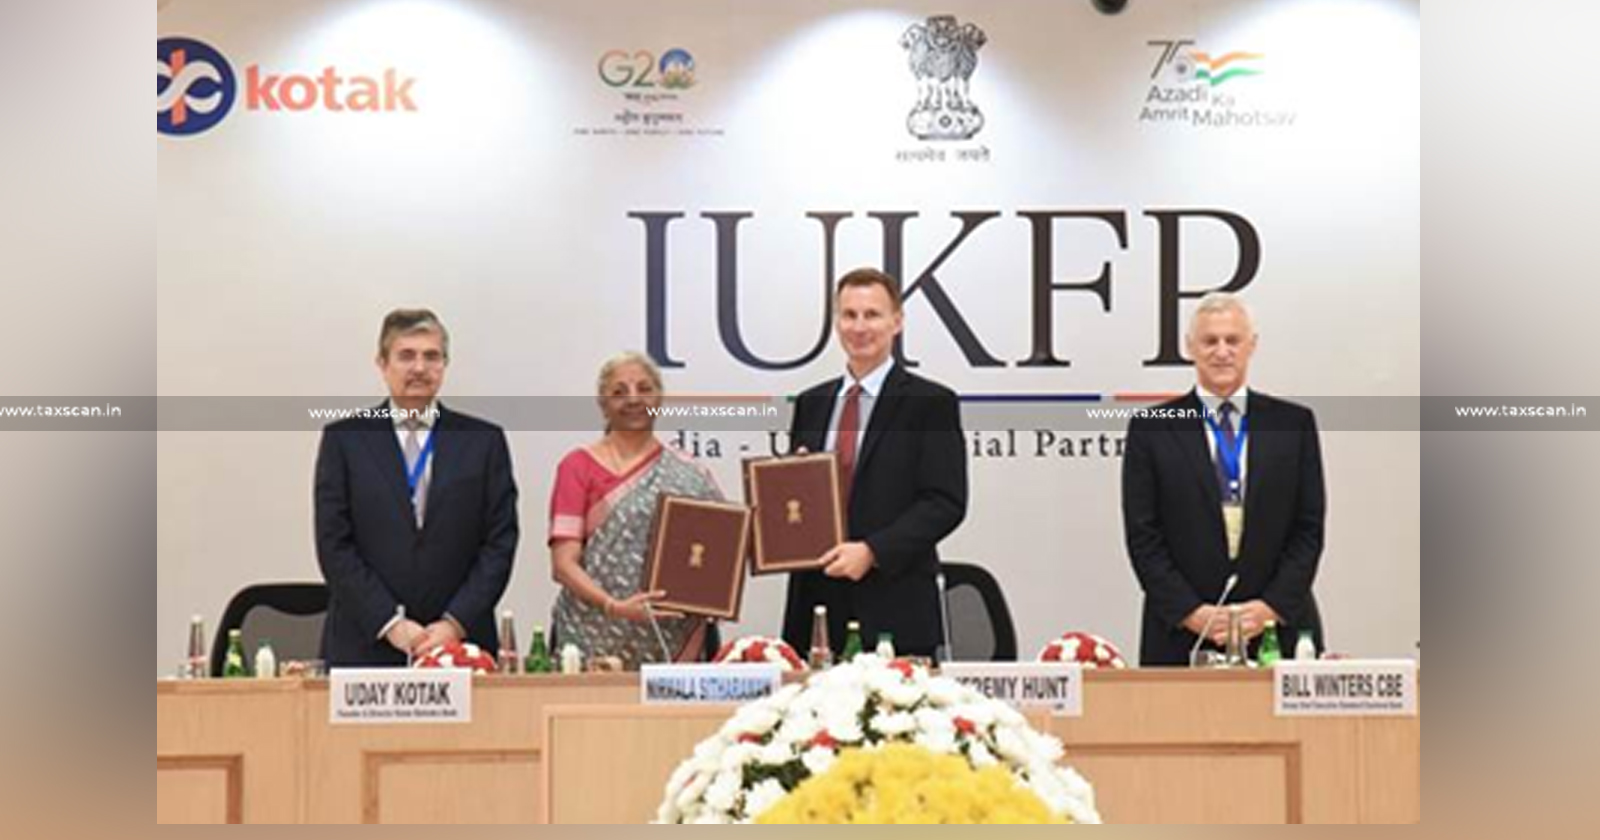 India-UK holds 12th EFD in New Delhi - Finance Minister - Chancellor of Exchequer of UK - Financial Services Links between Two Countries - Financial Services Links -12th EFD in New Delhi - taxscan